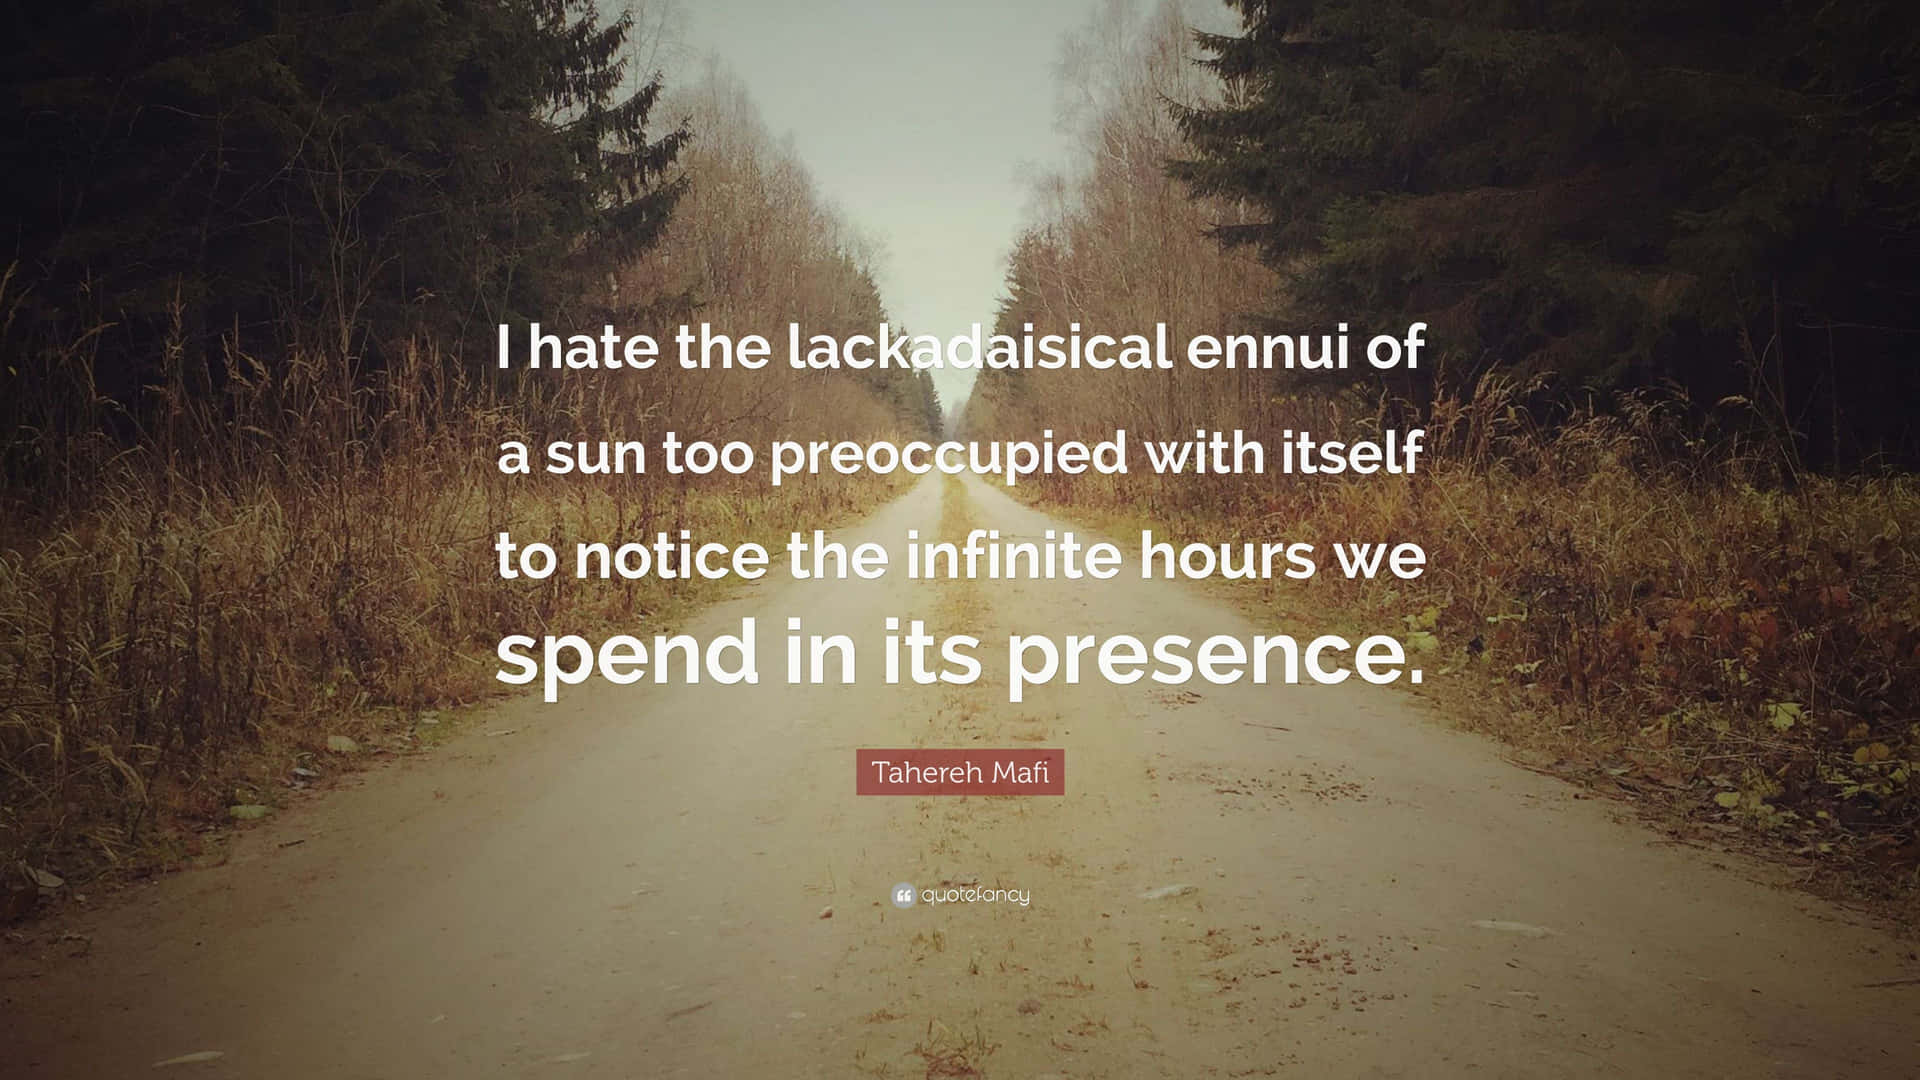 Lackadaisical Ennui Quote Forest Road Wallpaper